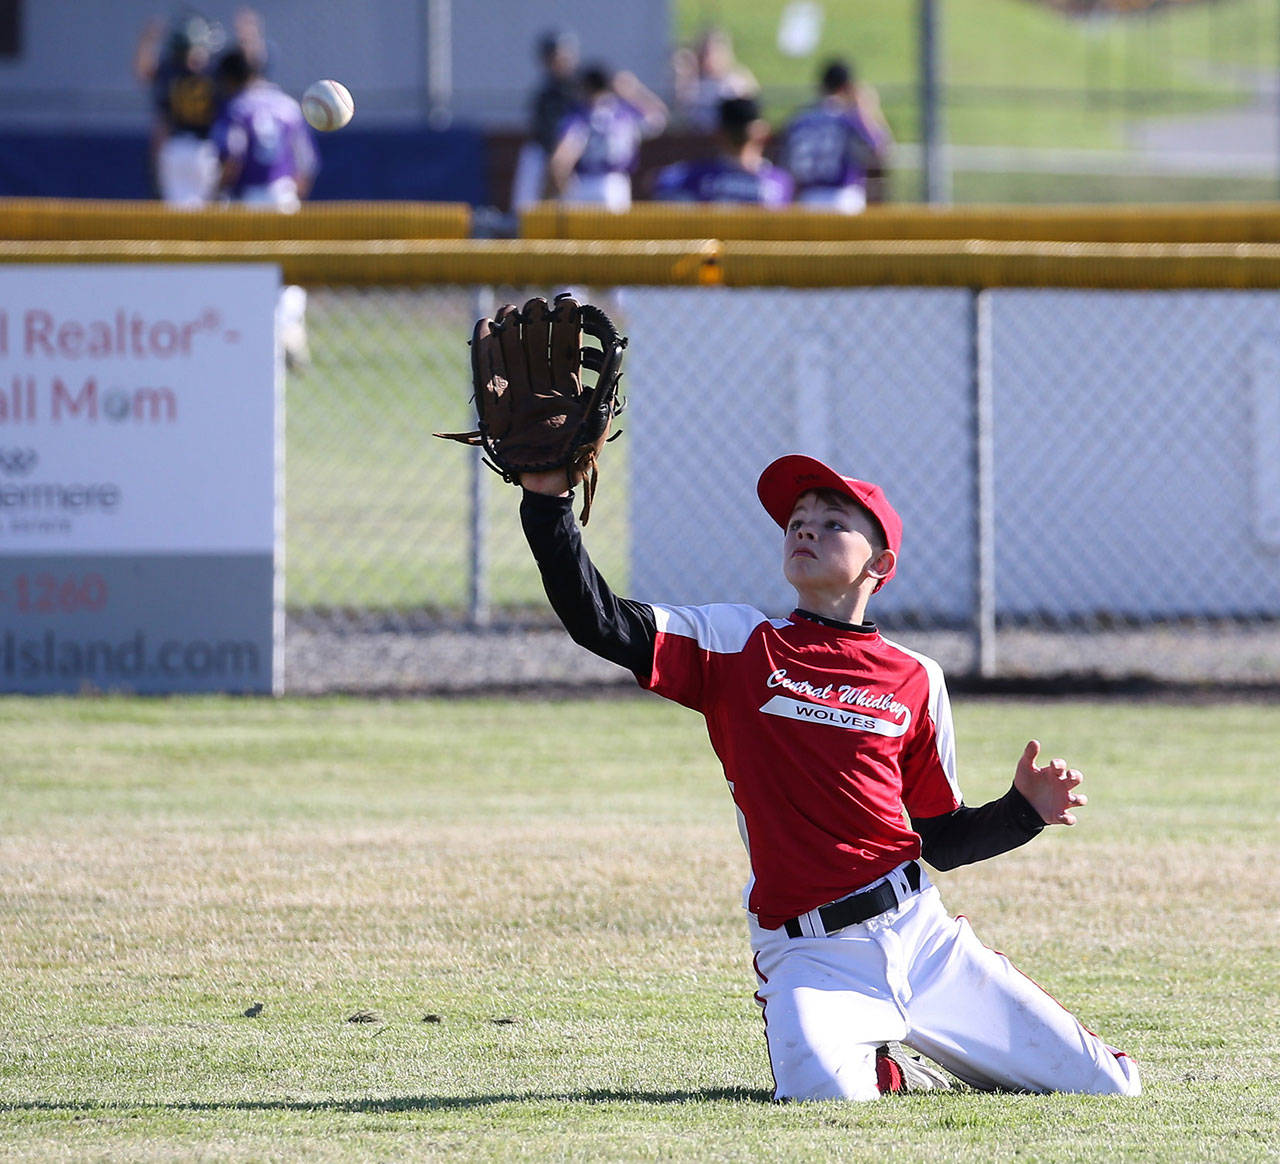 Jack Porter goes to his knees to secure a fly ball.(Photo by John Fisken)